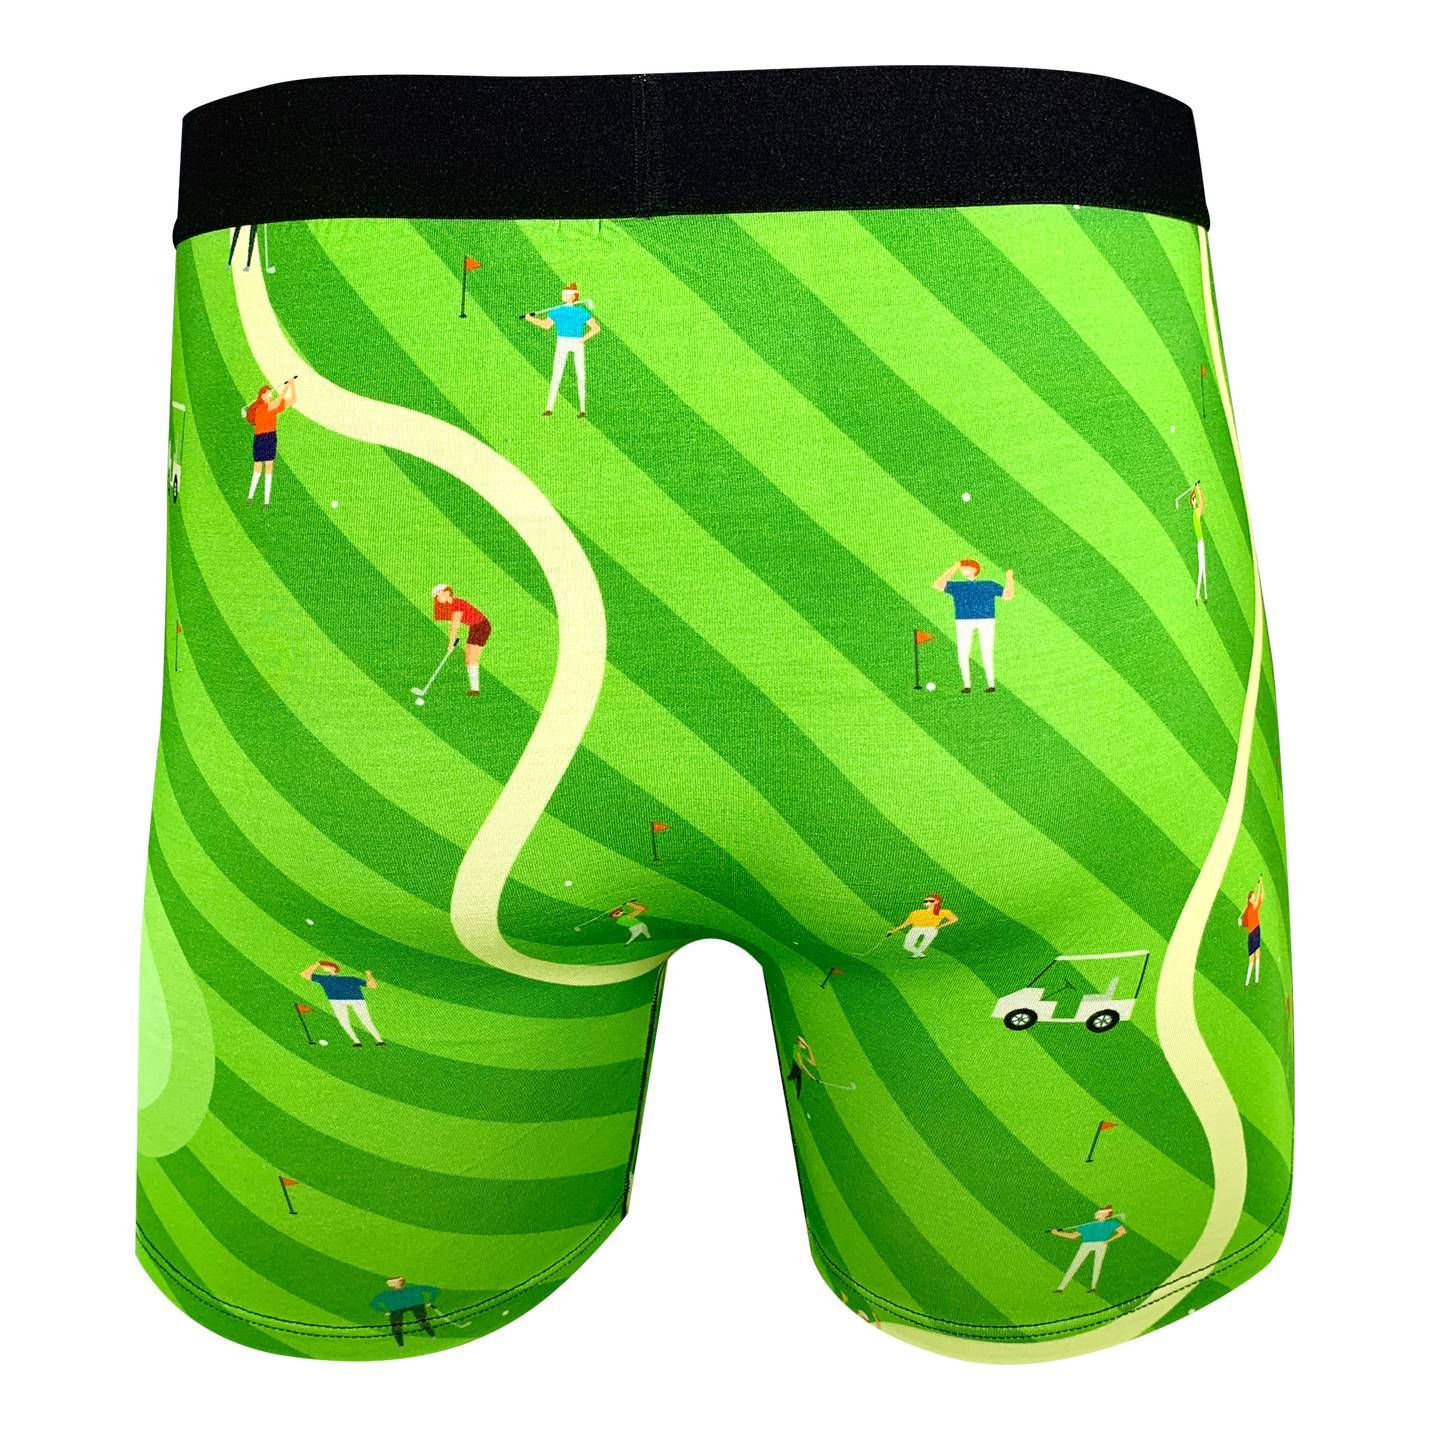 Yes, there is such a thing as golf performance underwear